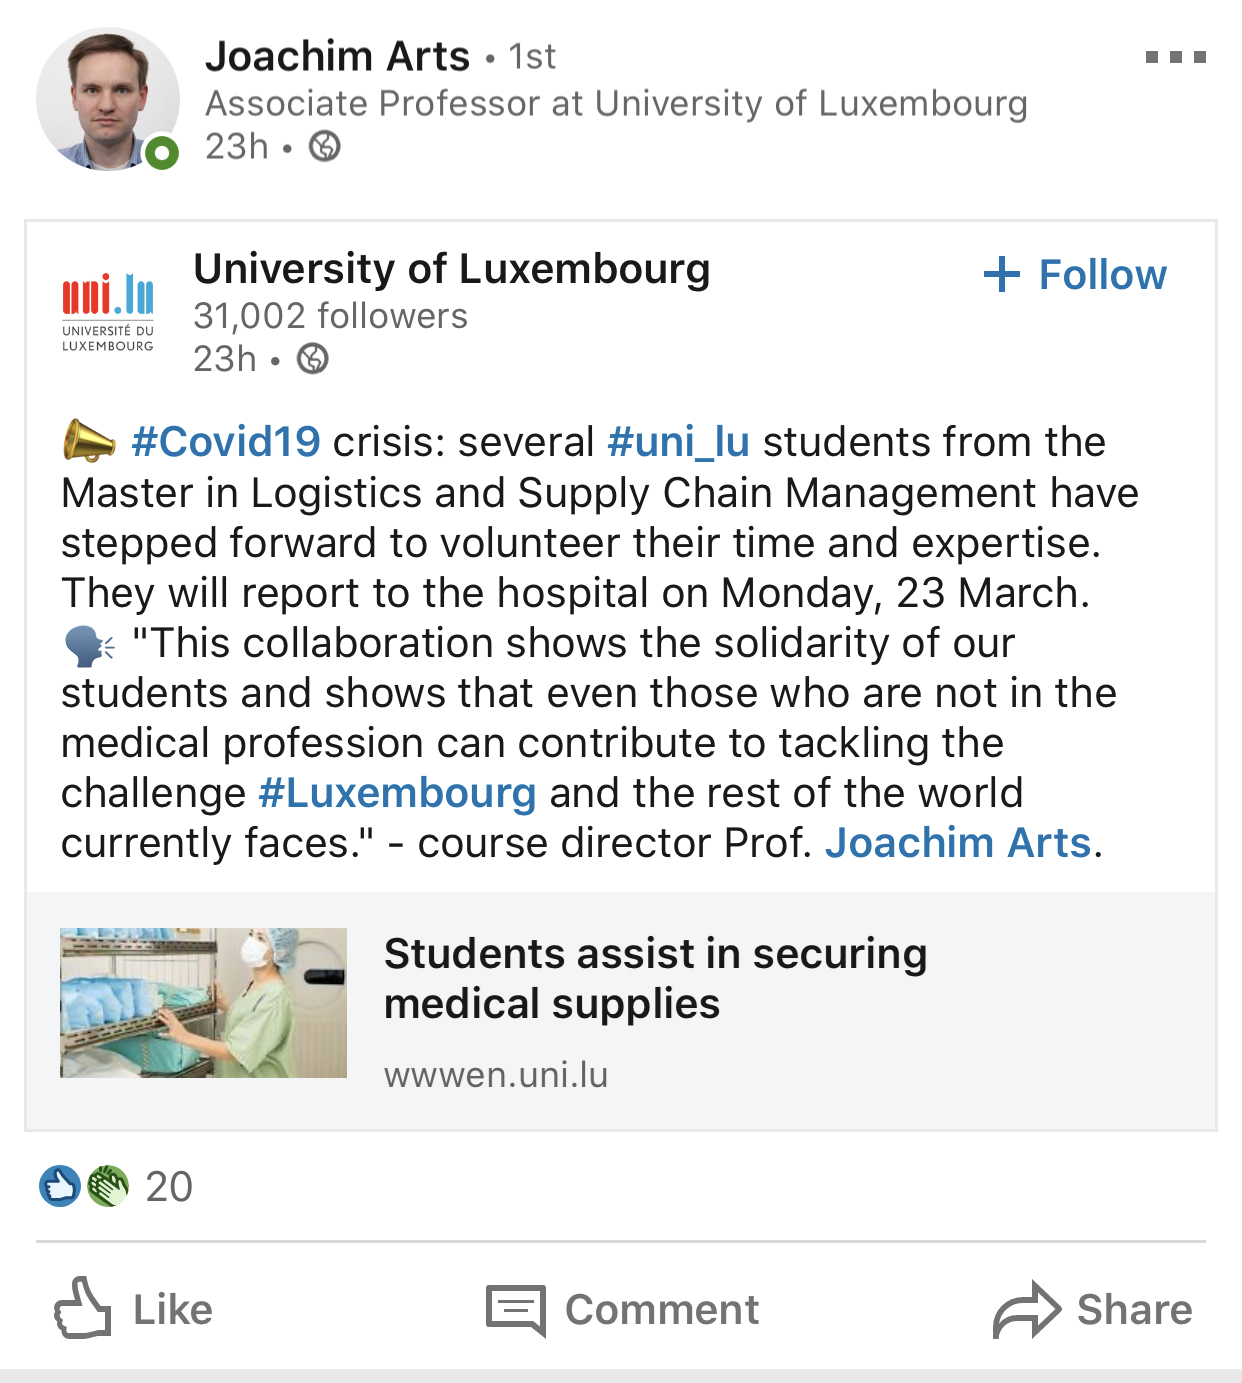 A post from Joachim Arts about LCL students volunteering to assist Luxembourg hospitals in finding medical supplies